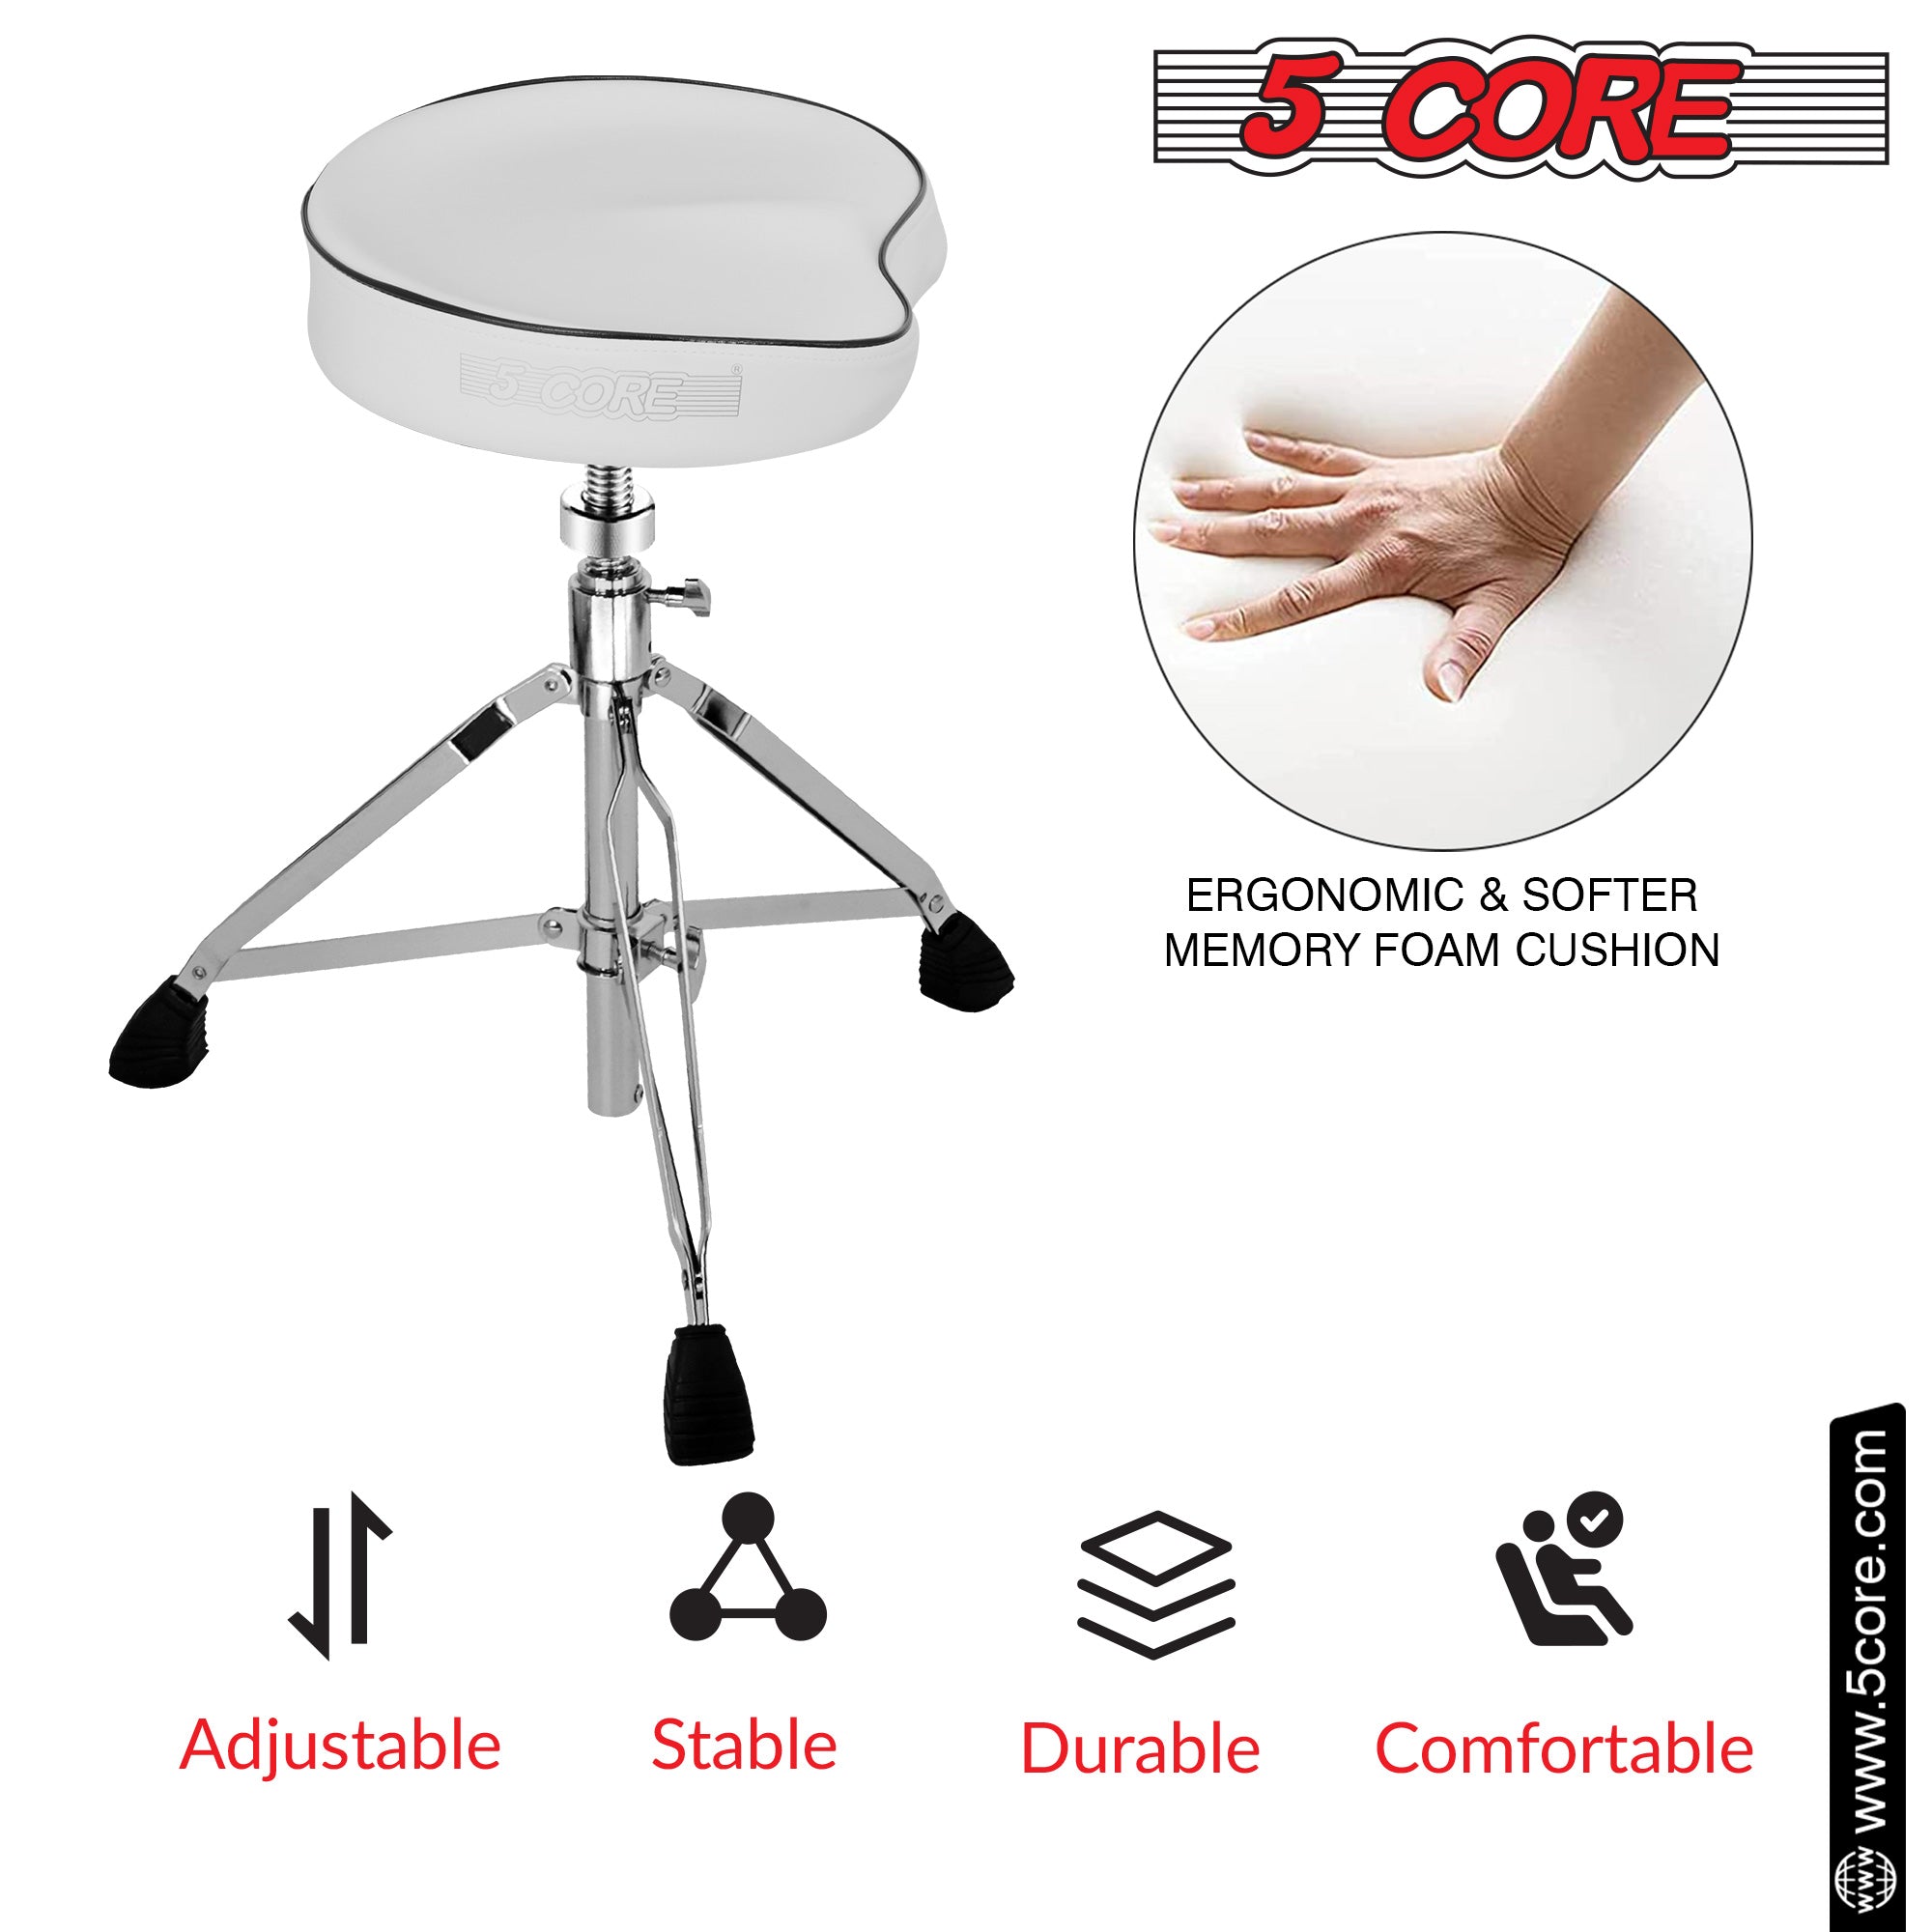 5 Core Drum Throne Saddle White| Heavy Duty Height Adjustable Padded Comfortable Drum Seat| Stools Chair  Style with Double Braced Anti-Slip Feet and Two Drumsticks for Adults Drummers- DS CH WH SDL HD